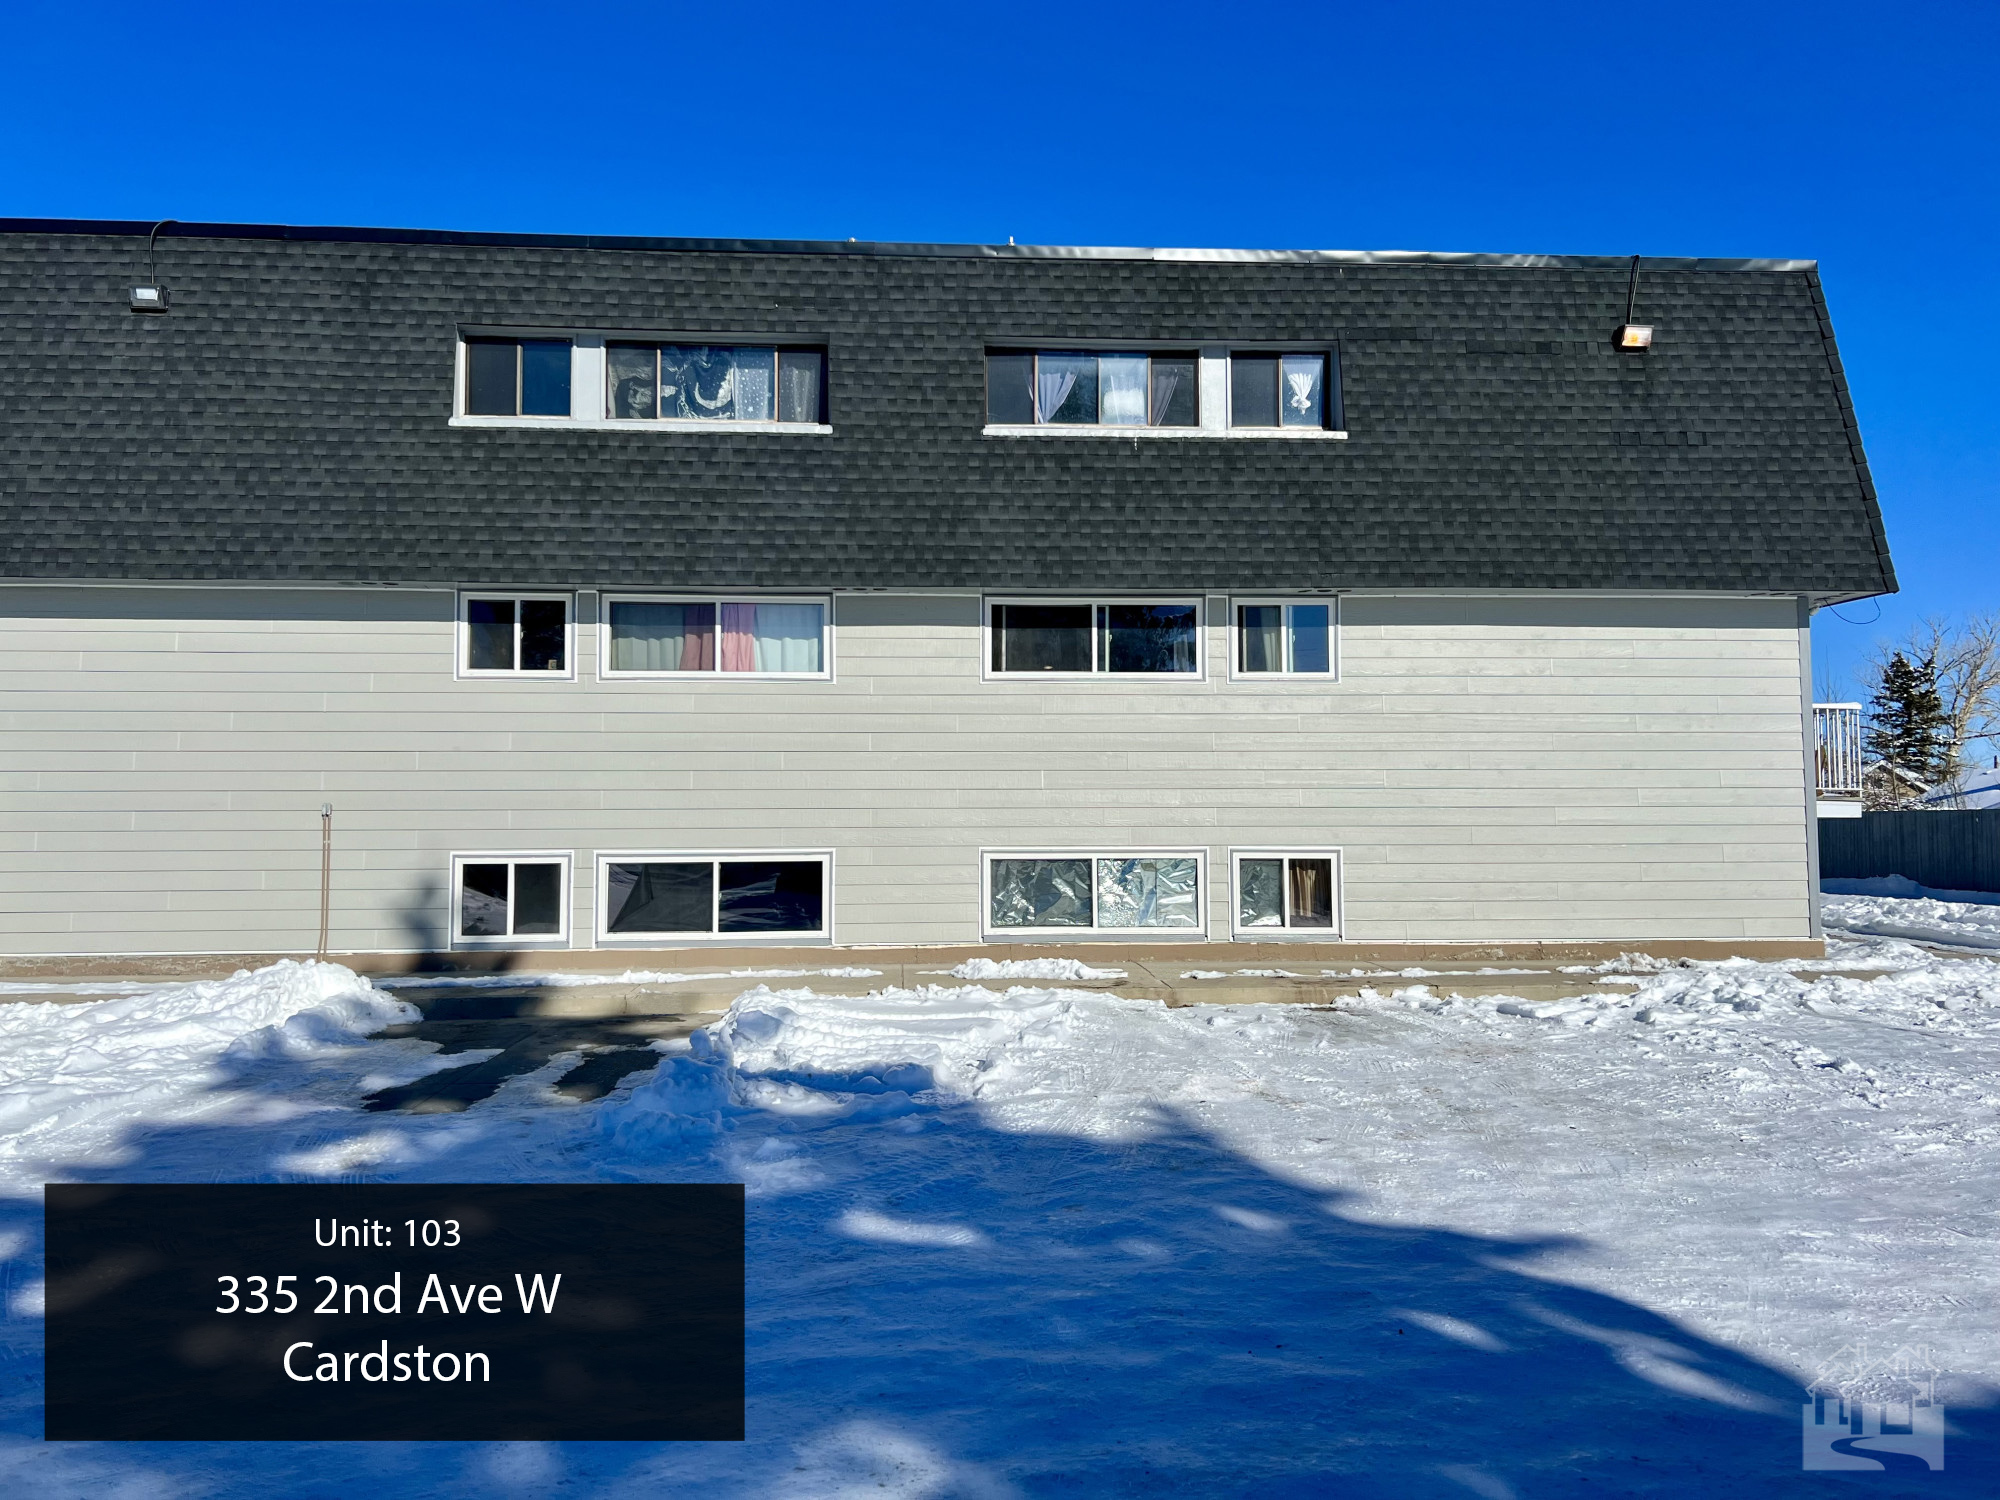 335 2nd Ave W Cardston (Unit 103) Cover image